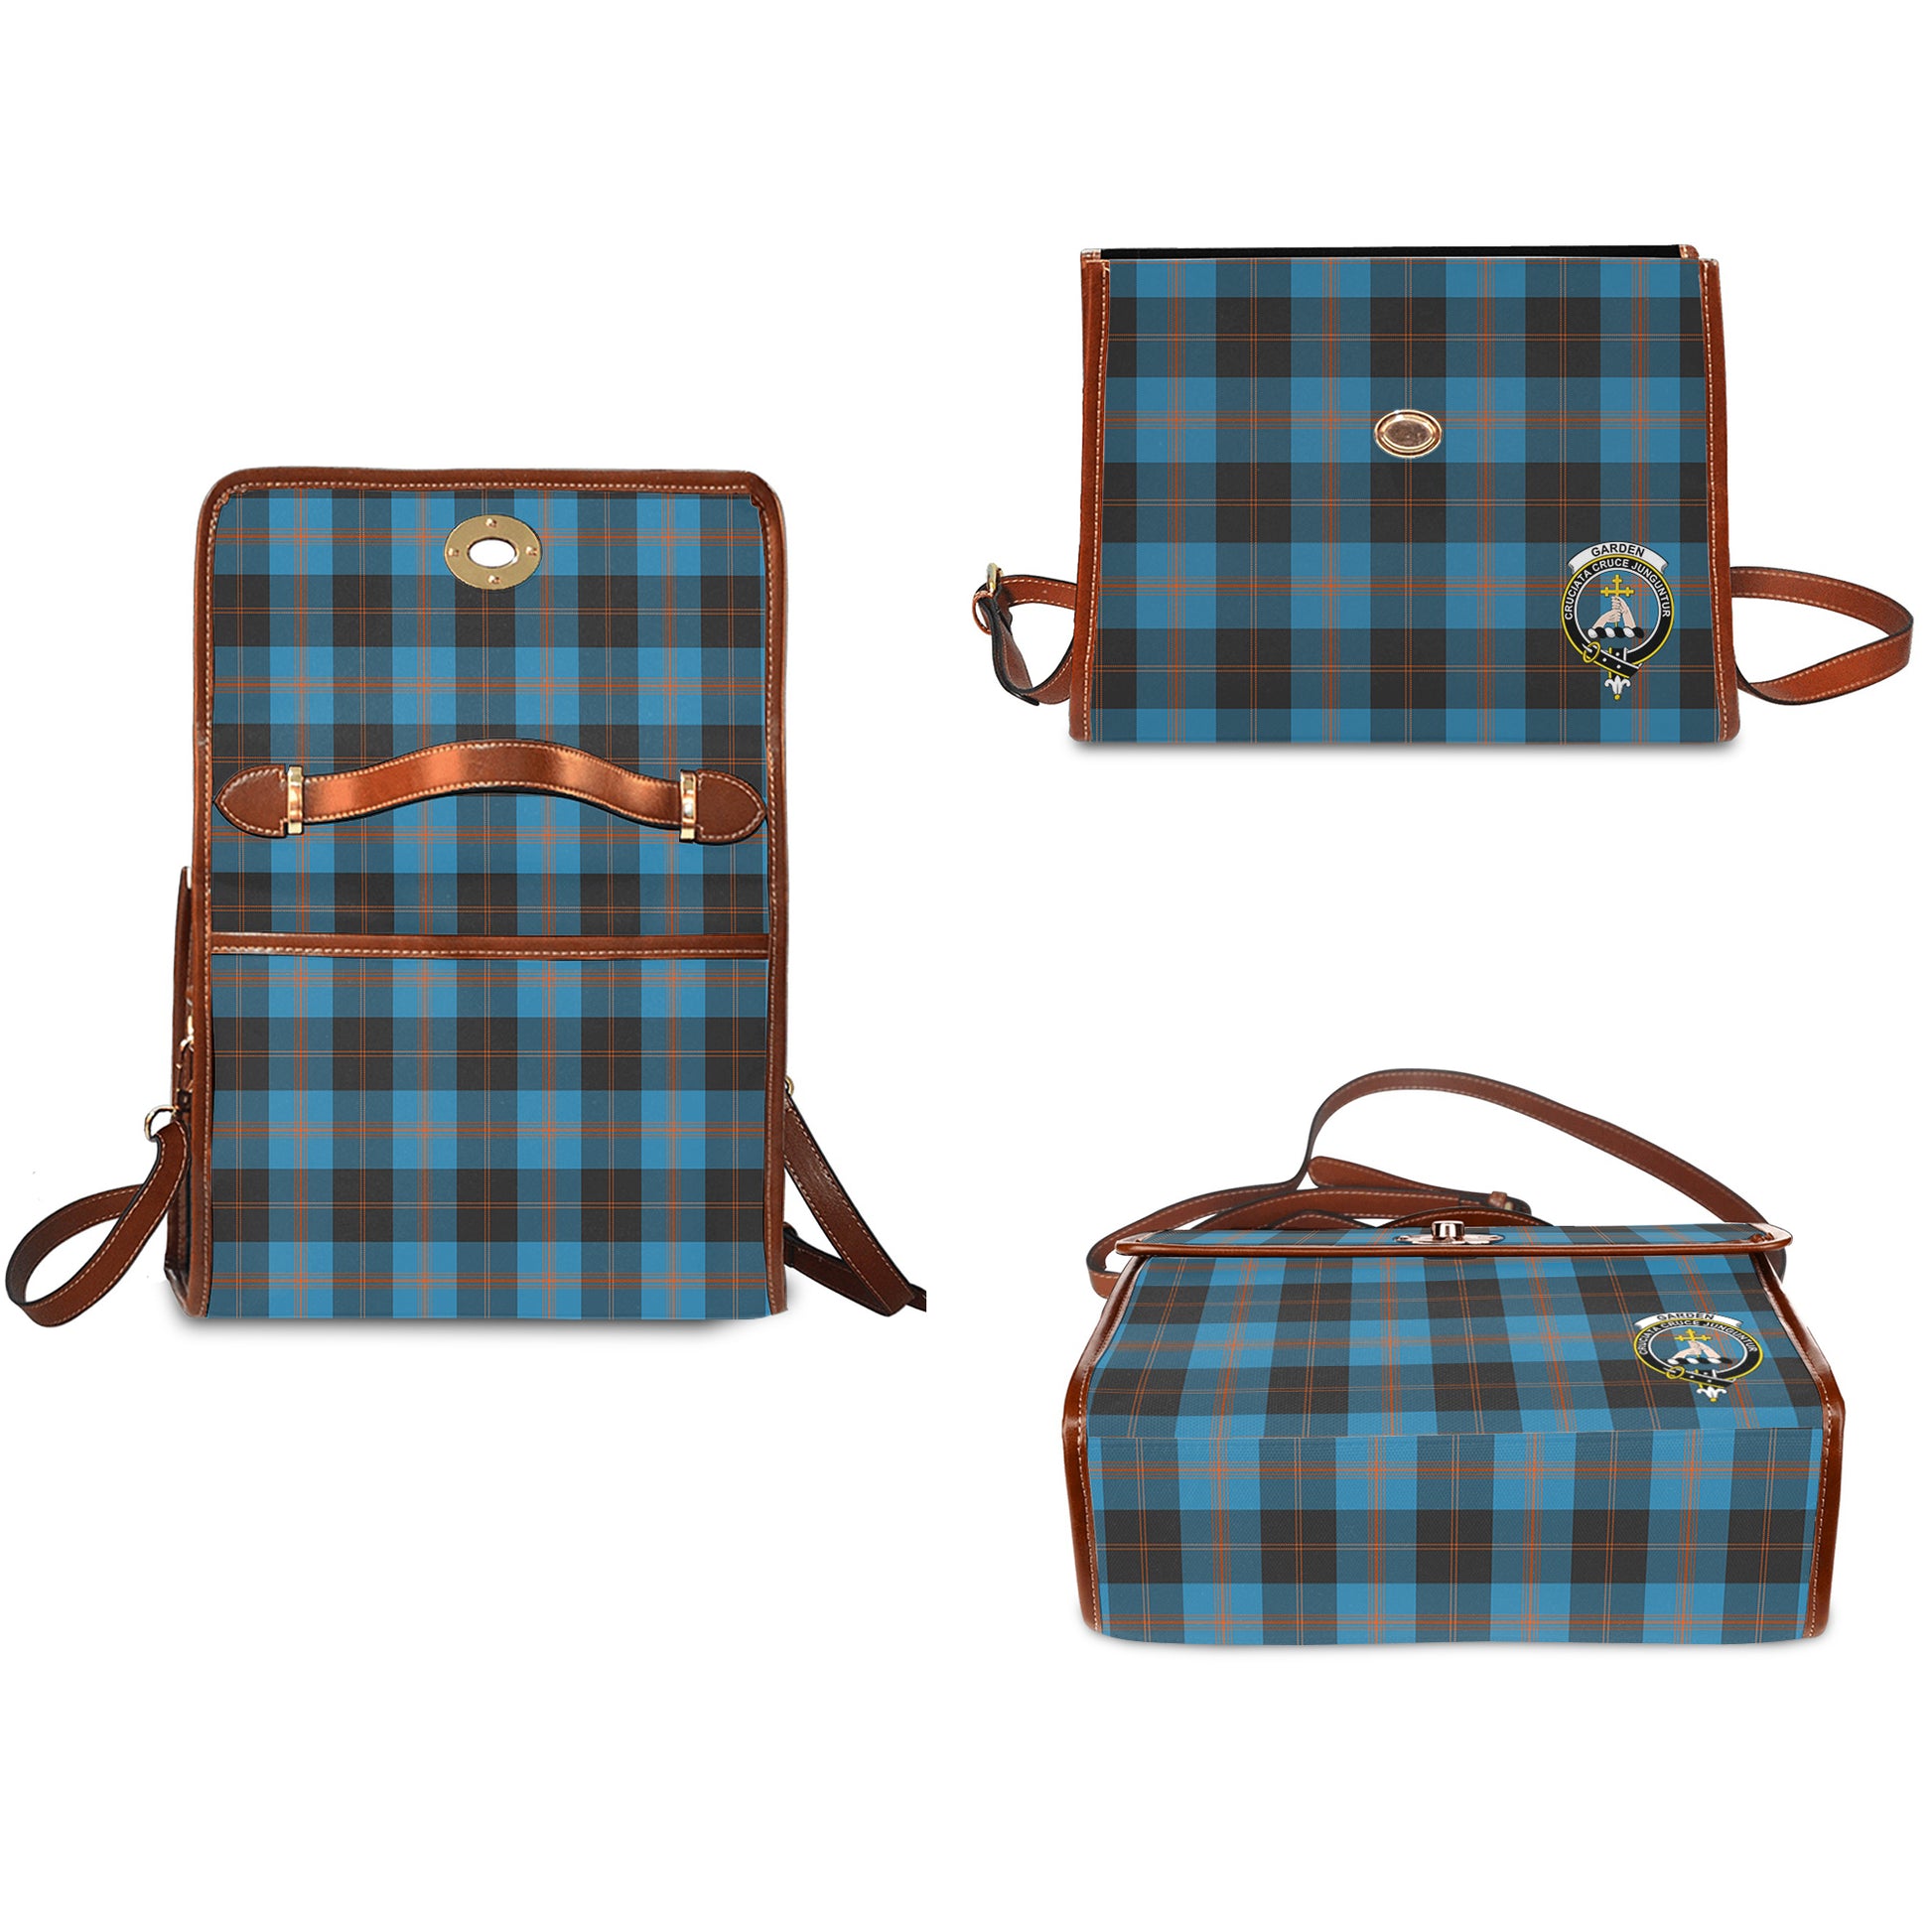 garden-tartan-leather-strap-waterproof-canvas-bag-with-family-crest